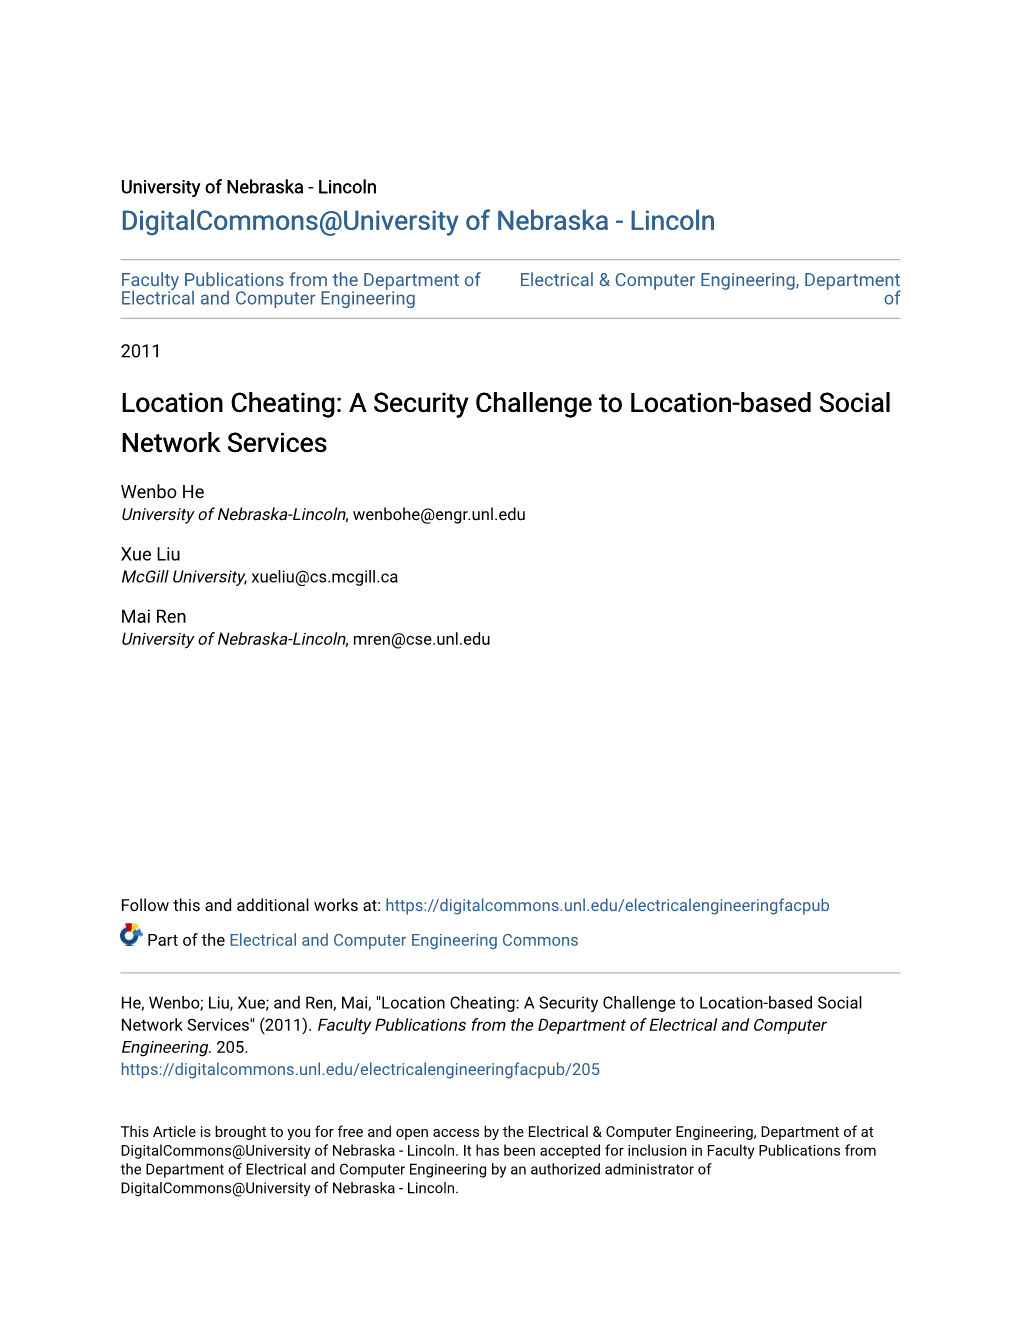 Location Cheating: a Security Challenge to Location-Based Social Network Services